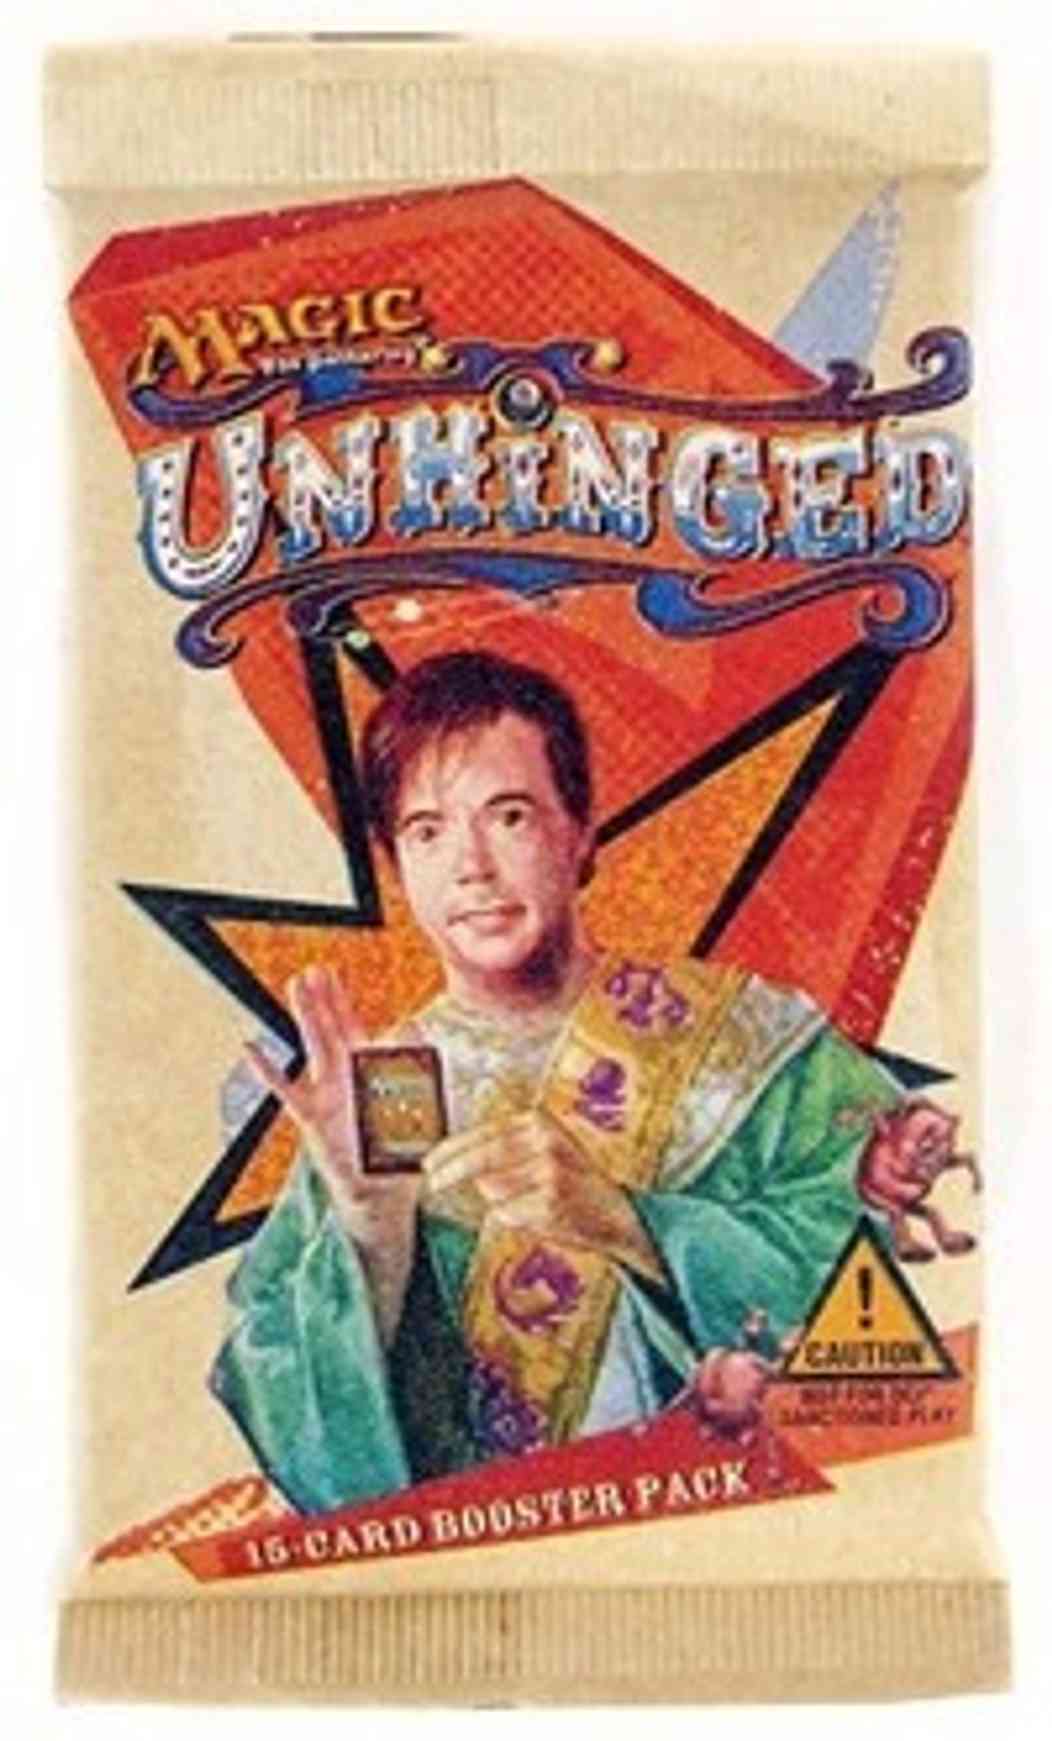 Unhinged Booster Pack magic card front